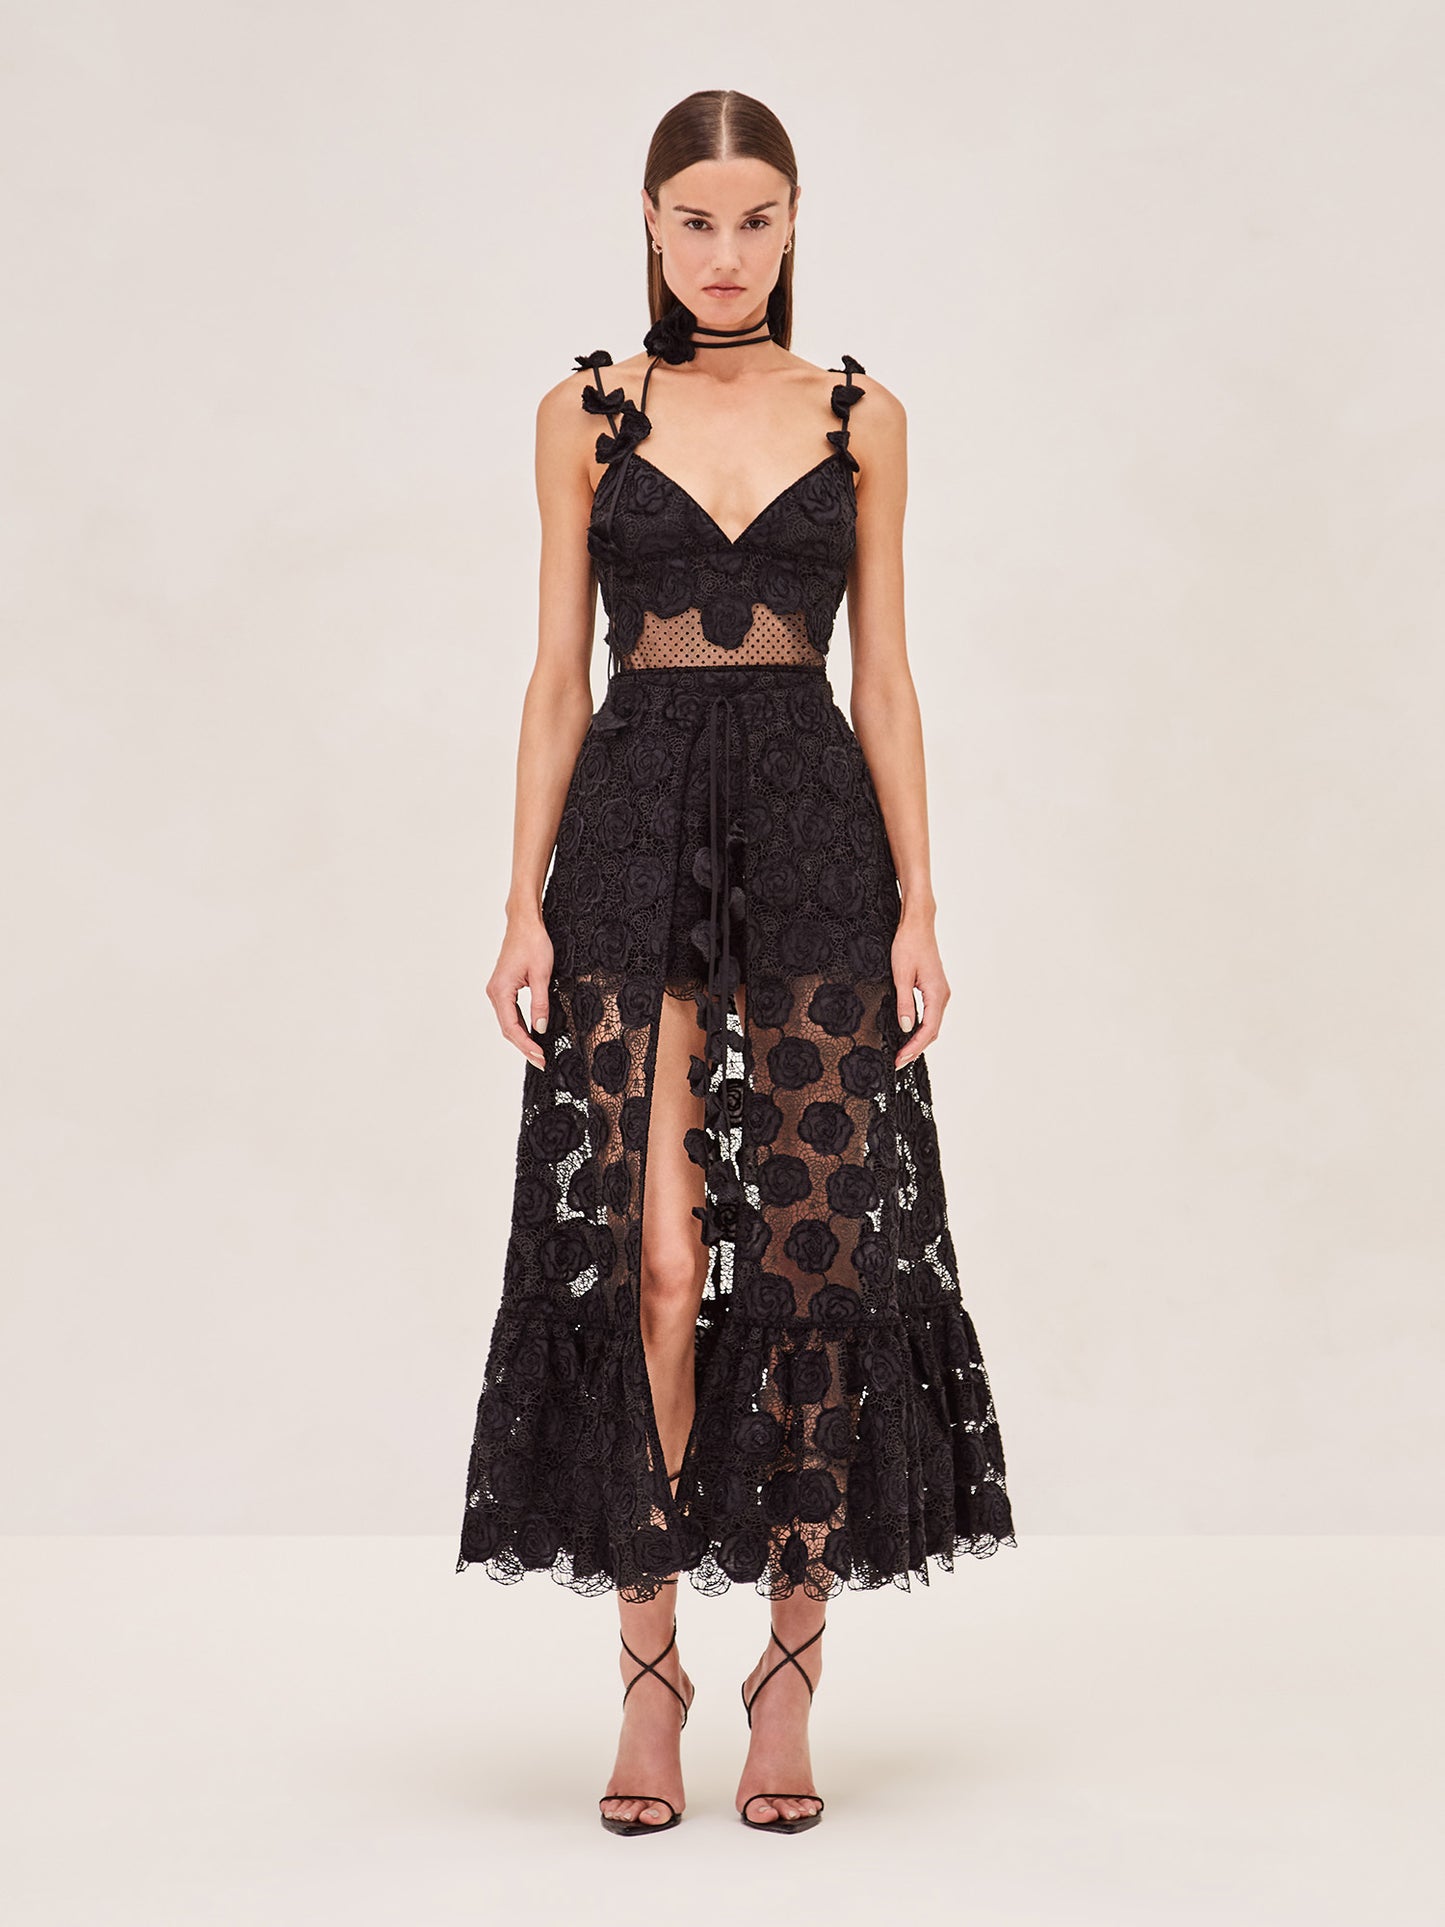 ALEXIS Armas romper in black lace with removeable skirt cape